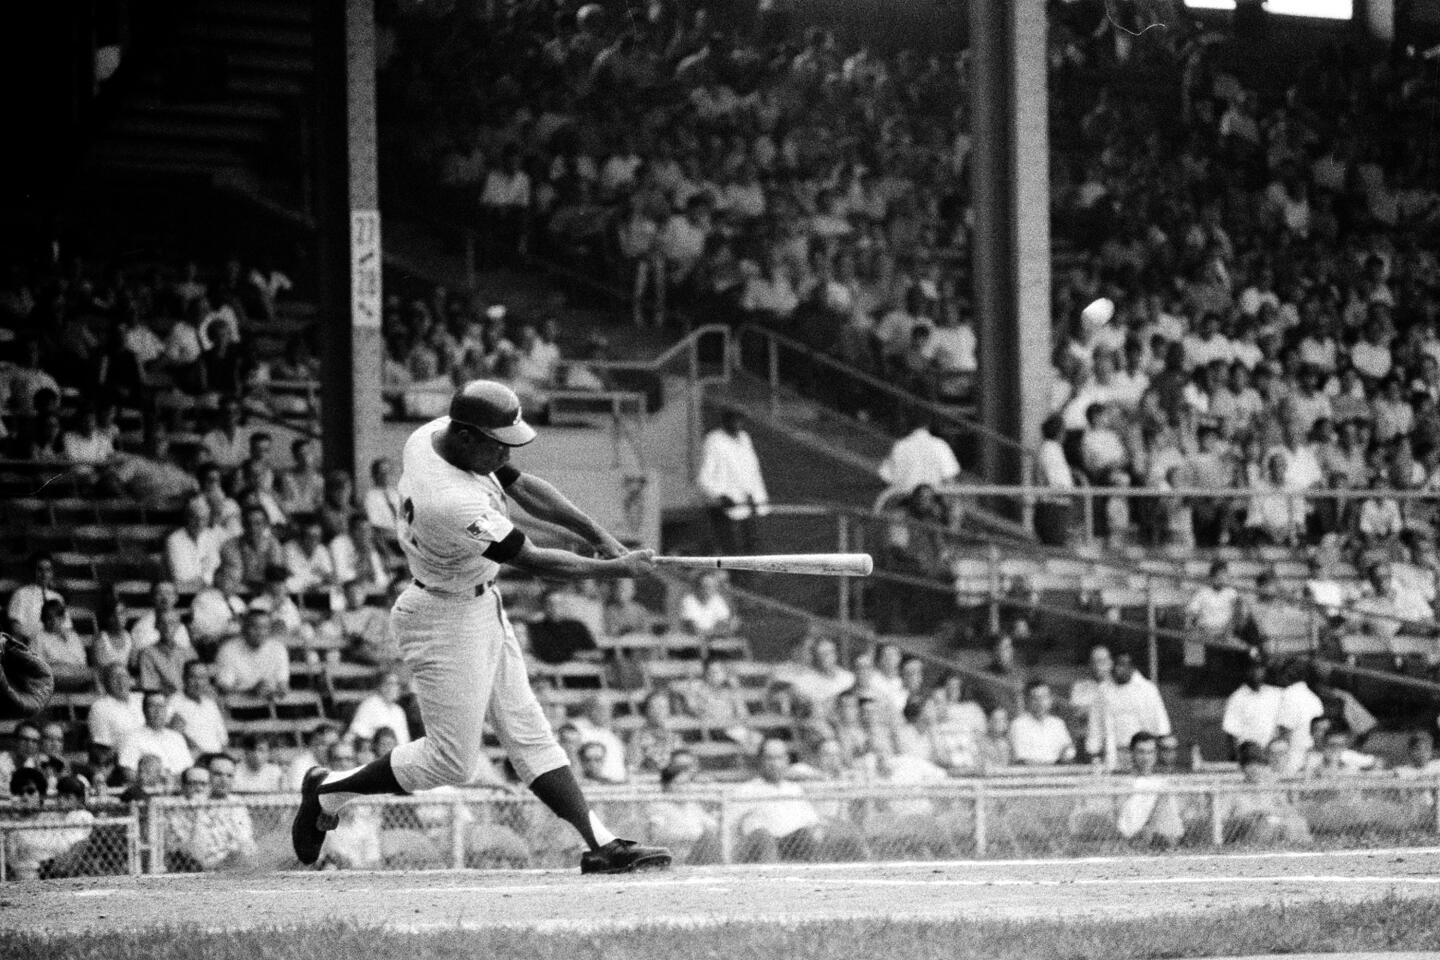 Hank Aaron dead at 86: Baseball's forever home run king was a true